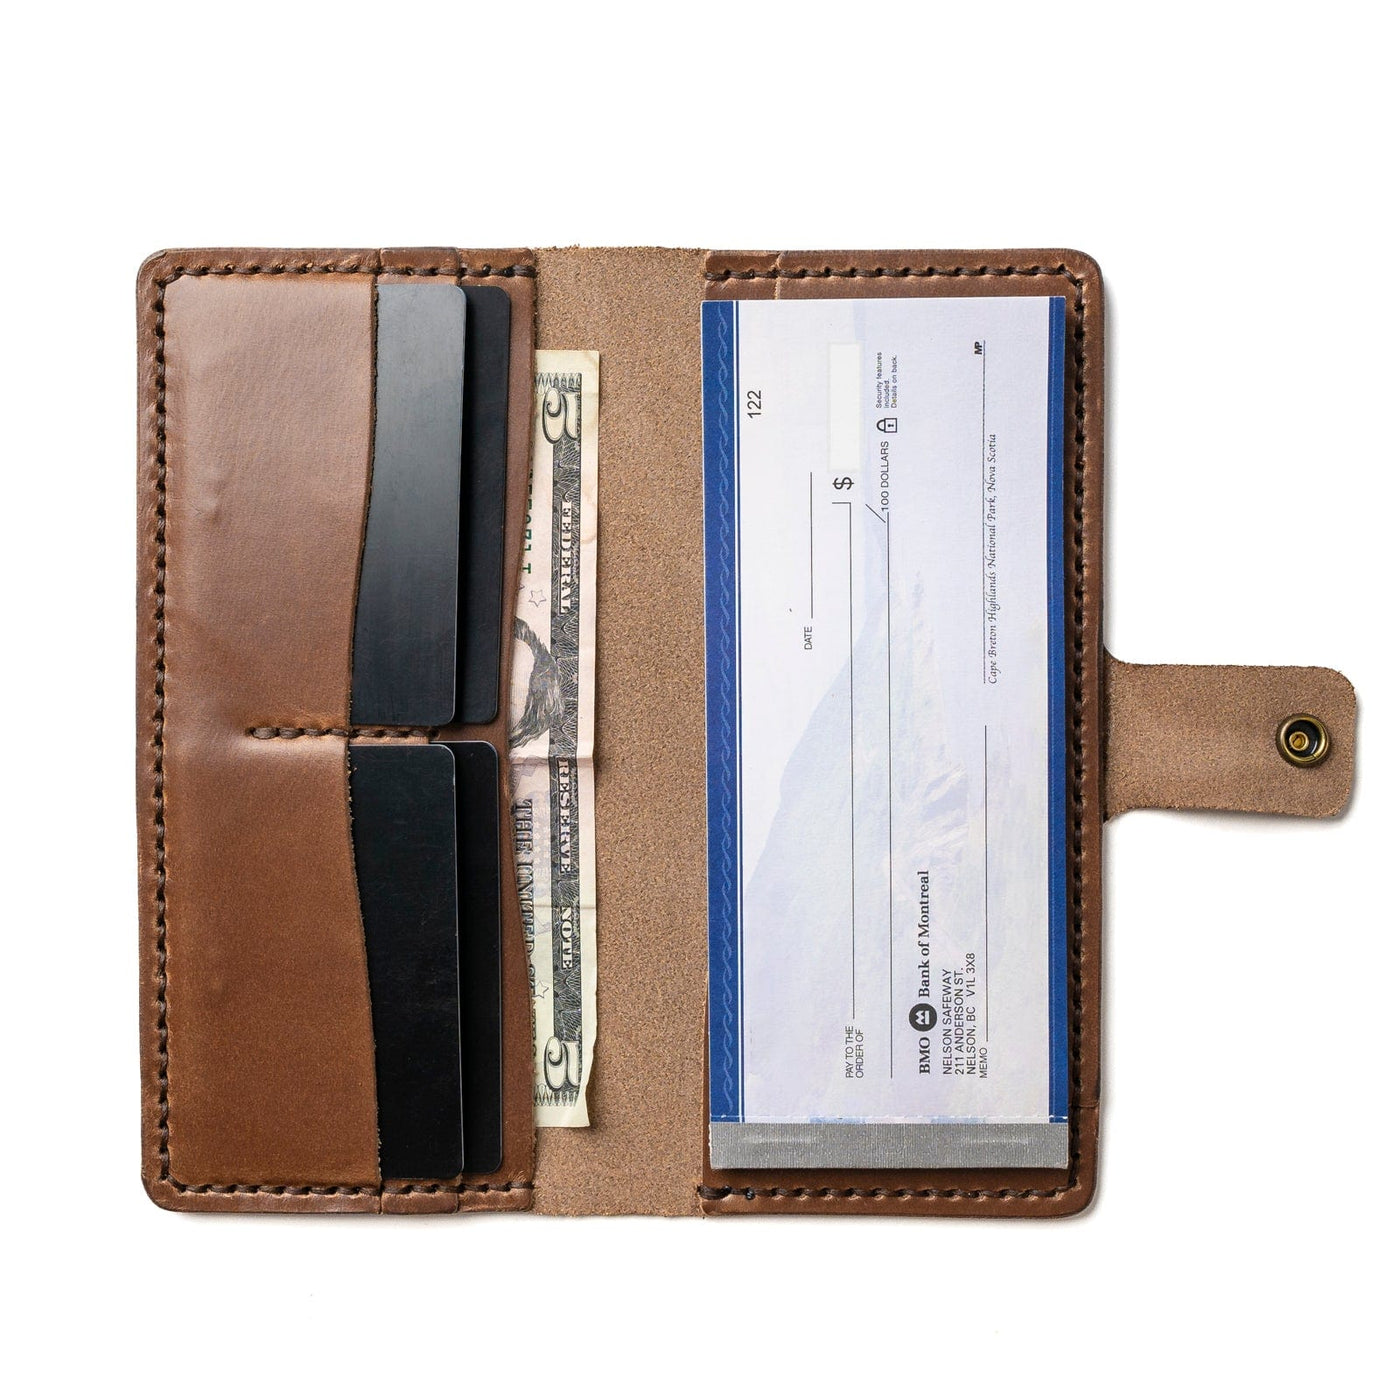 Leather Checkbook Wallet - Natural Popov Leather